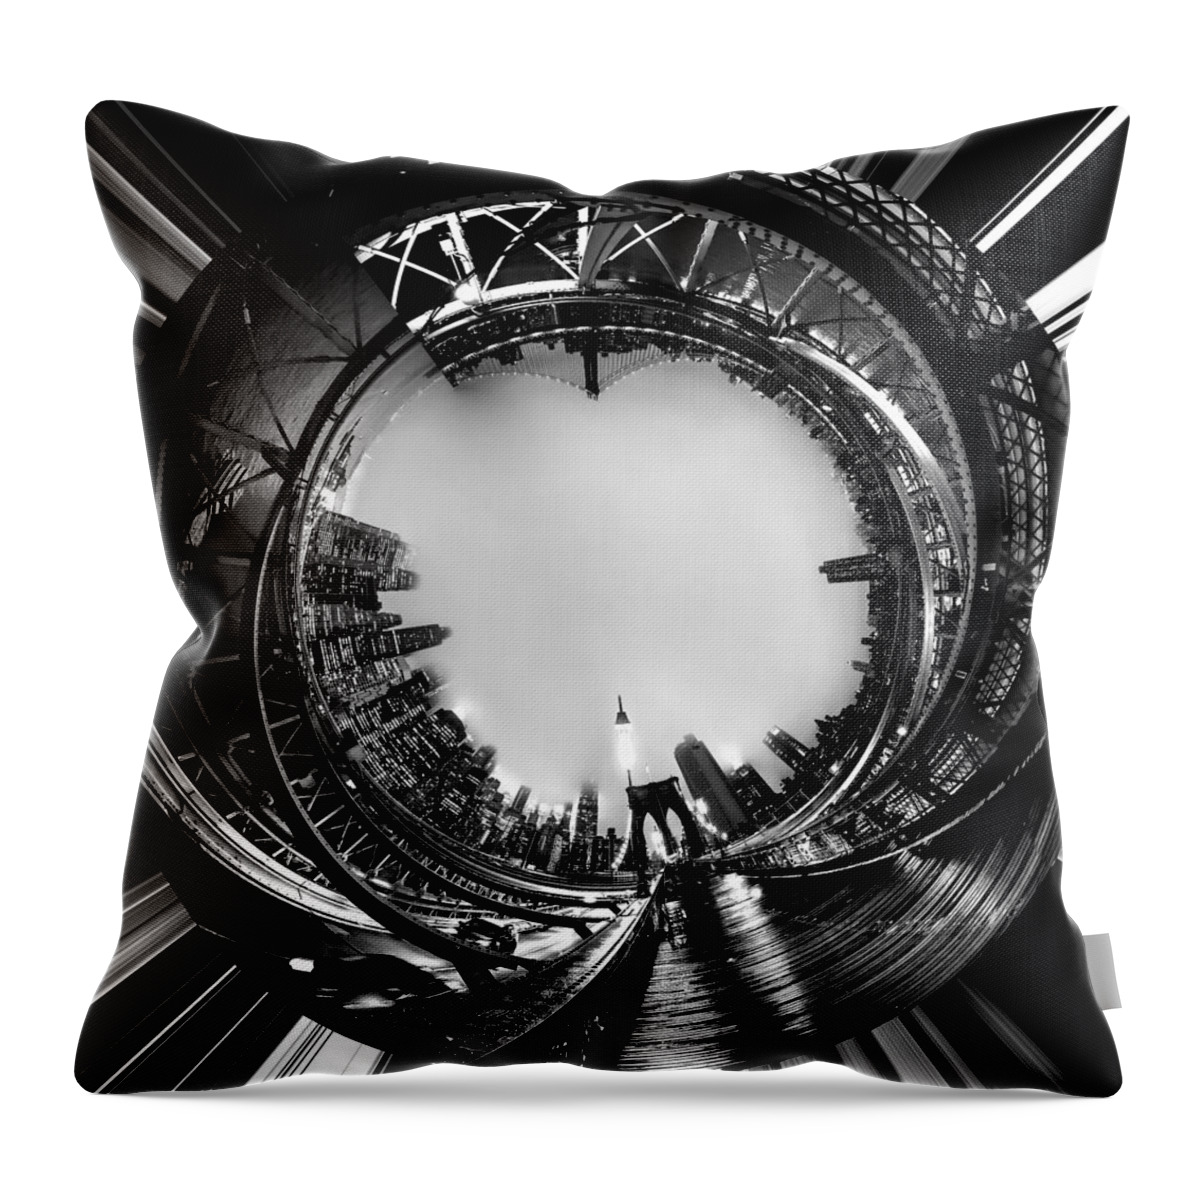 United States Of America Throw Pillow featuring the photograph Brooklyn Bridge Circagraph 4 by Az Jackson